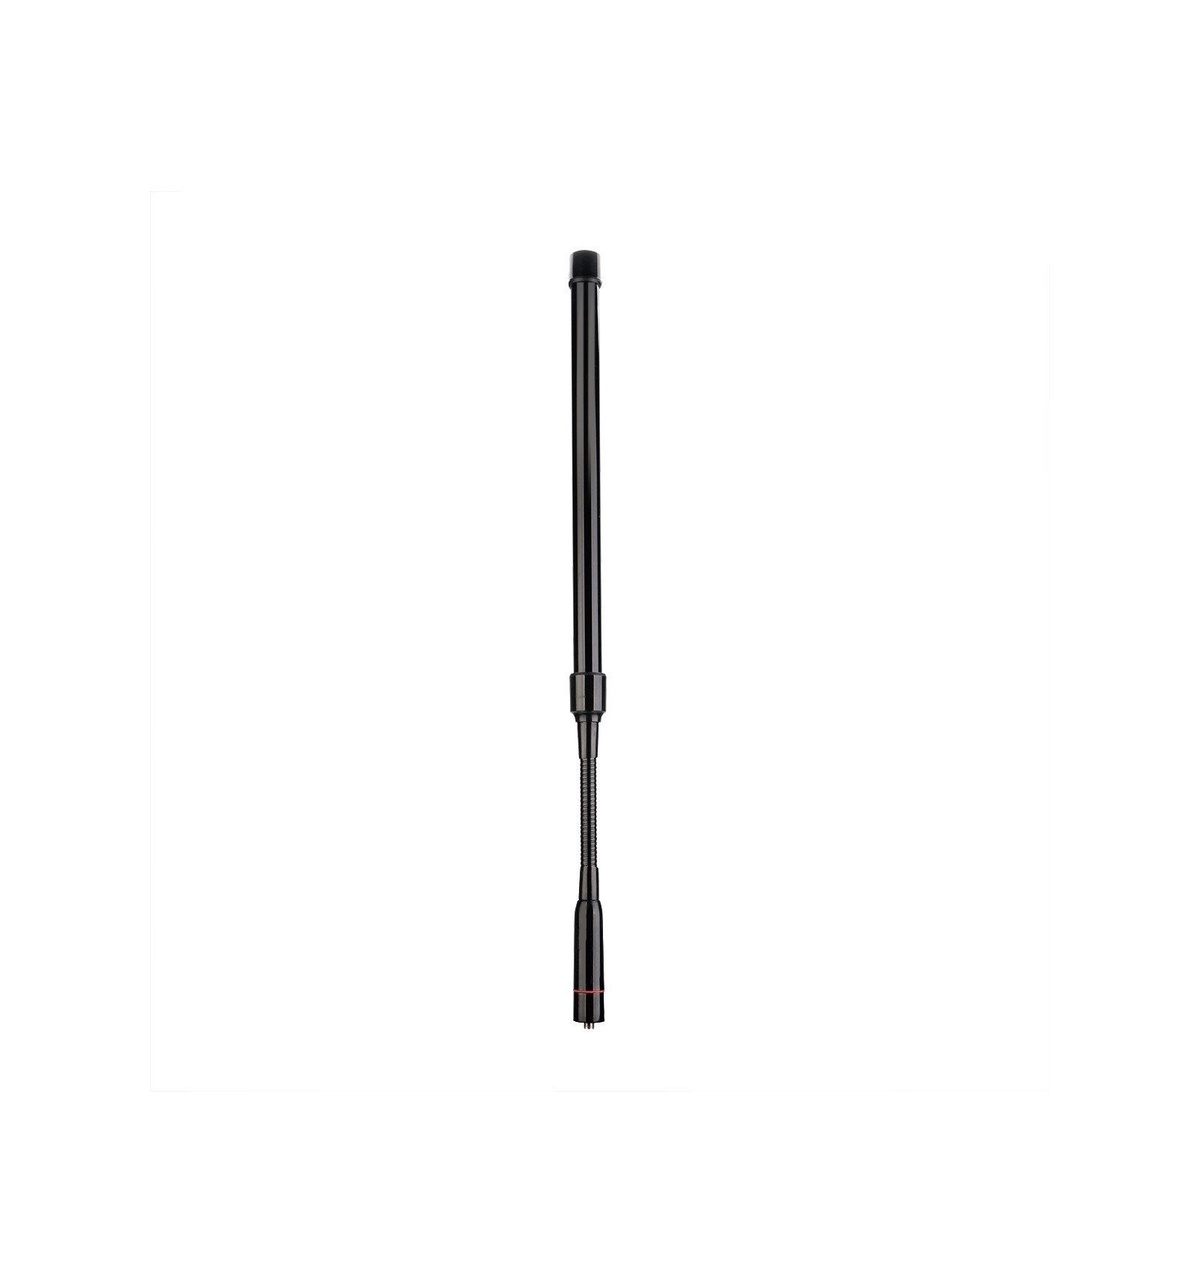 Antenna Experts Official Launches Tactical Antenna